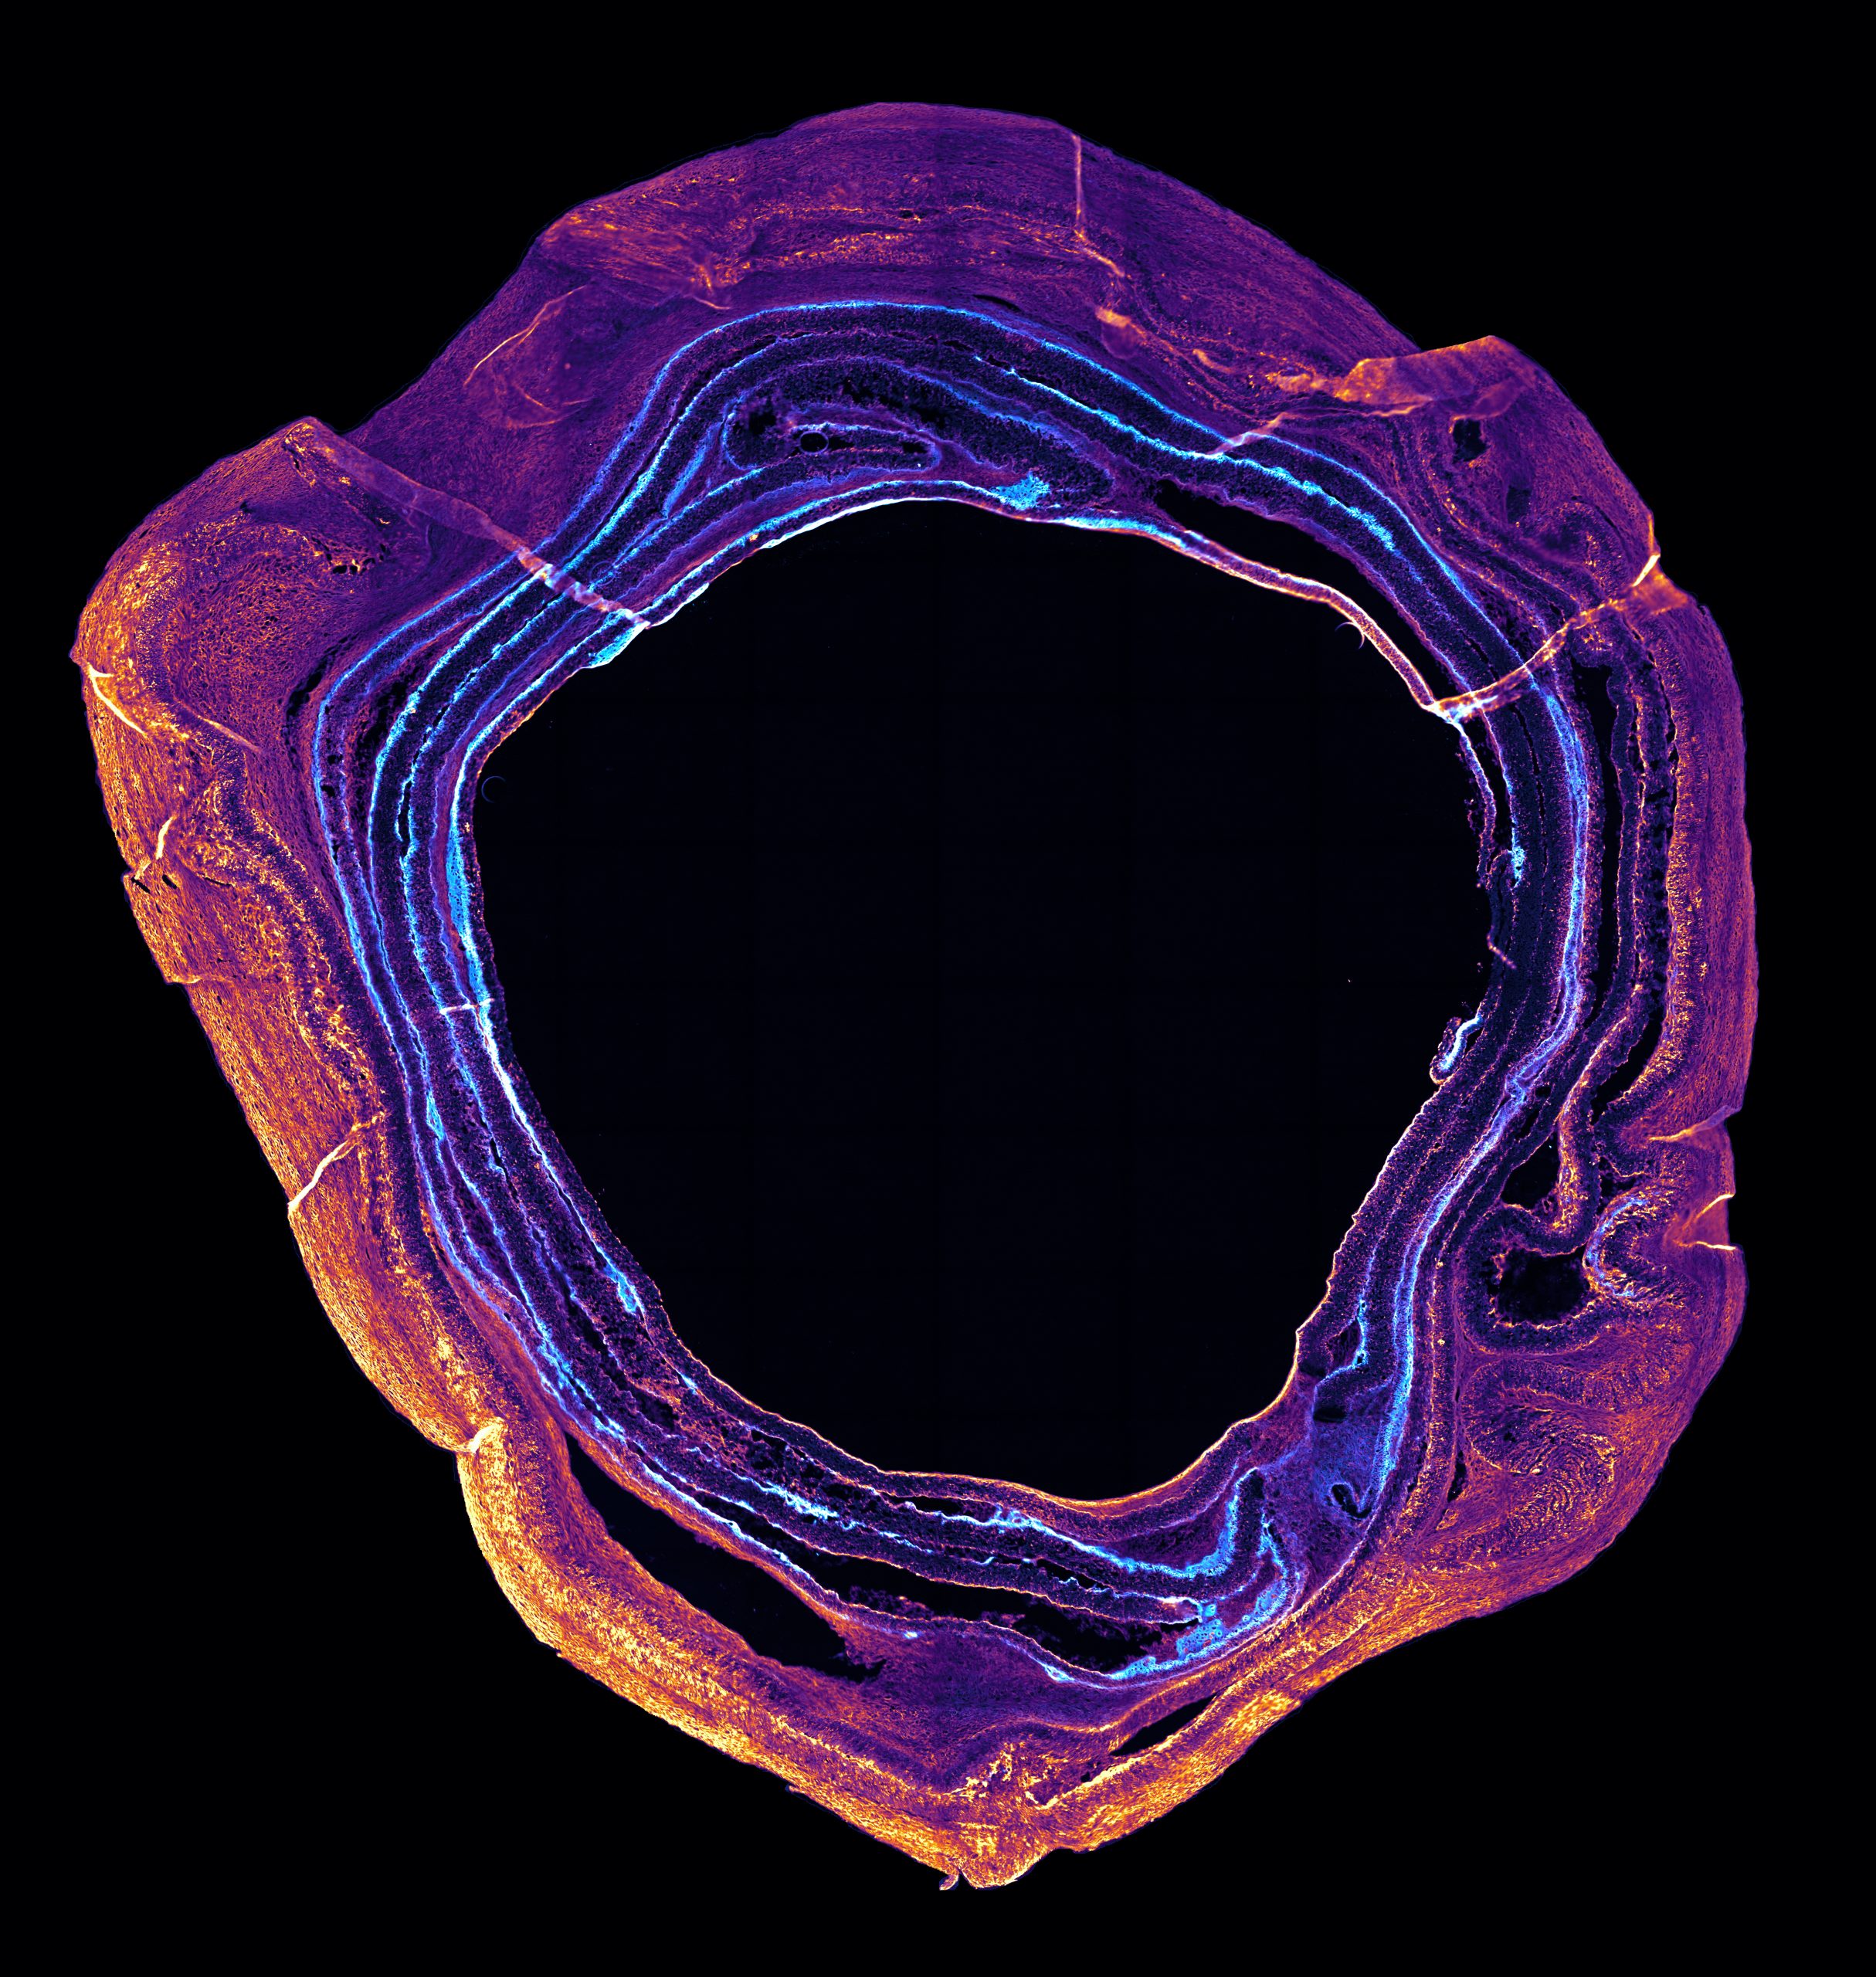 Microscope photo of lab grown intervertebral disc. Deep black background with concentric circles, transitioning in colour from cyan blue rings in the centre to magenta and finally to hot yellow on the outermost rings.